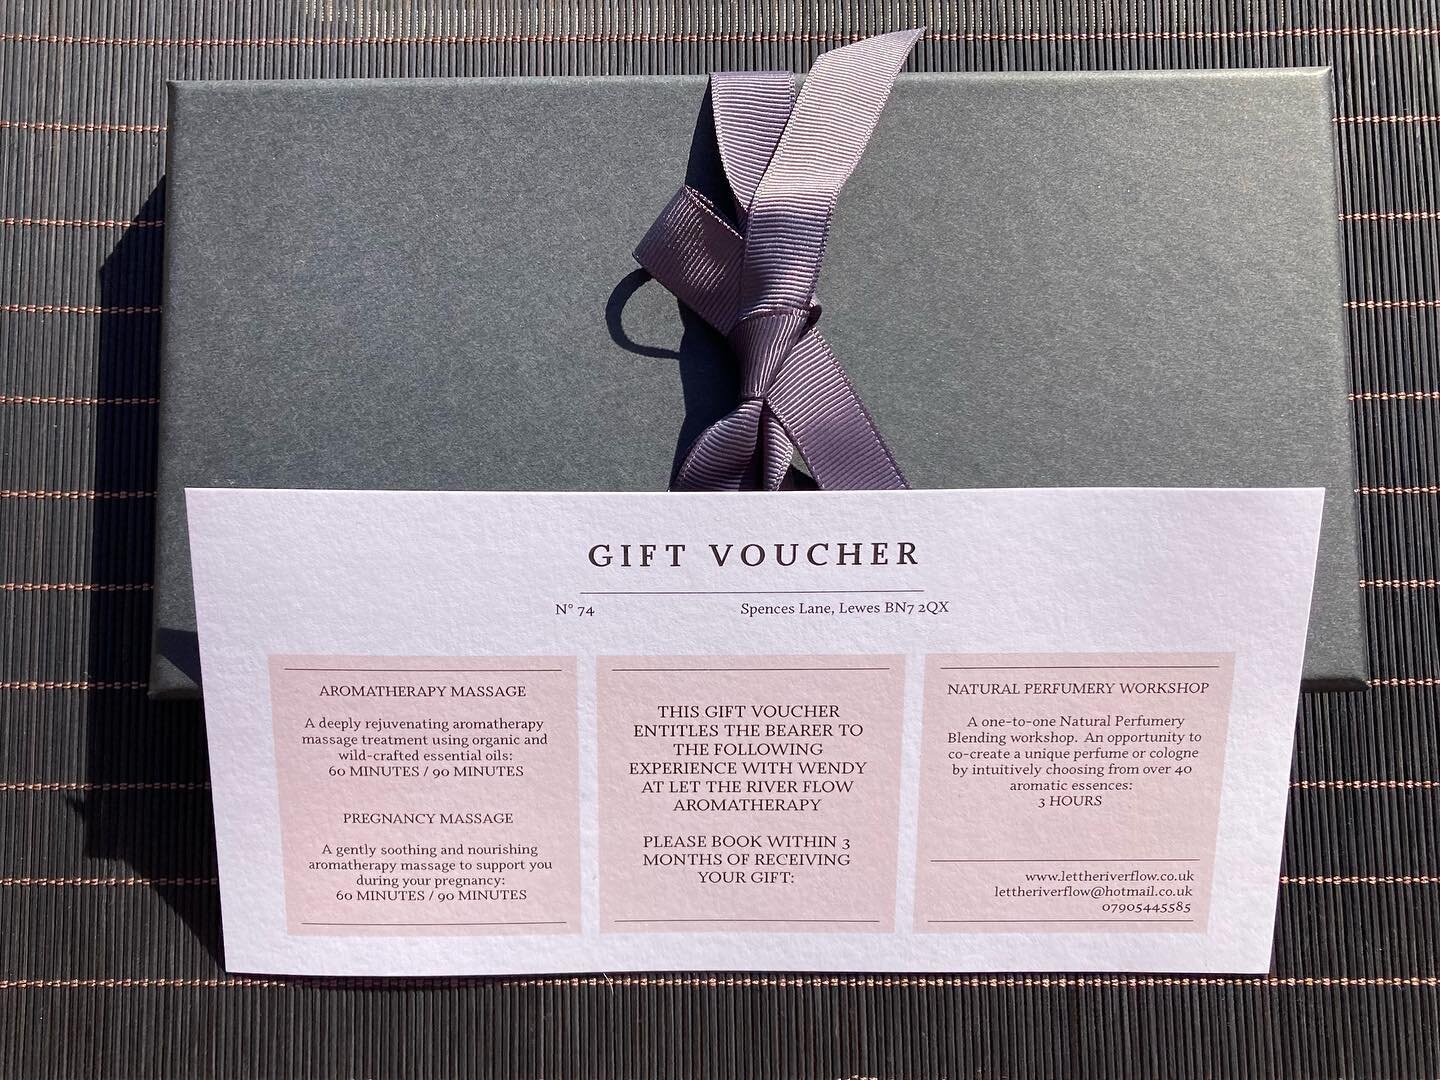 I&rsquo;m so happy with the beautiful slimline gift boxes i&rsquo;ve received to house my gift vouchers. It is very satisfying taking care to get the packaging just right and imagining the tactical pleasure in opening a surprise gift of an aromathera